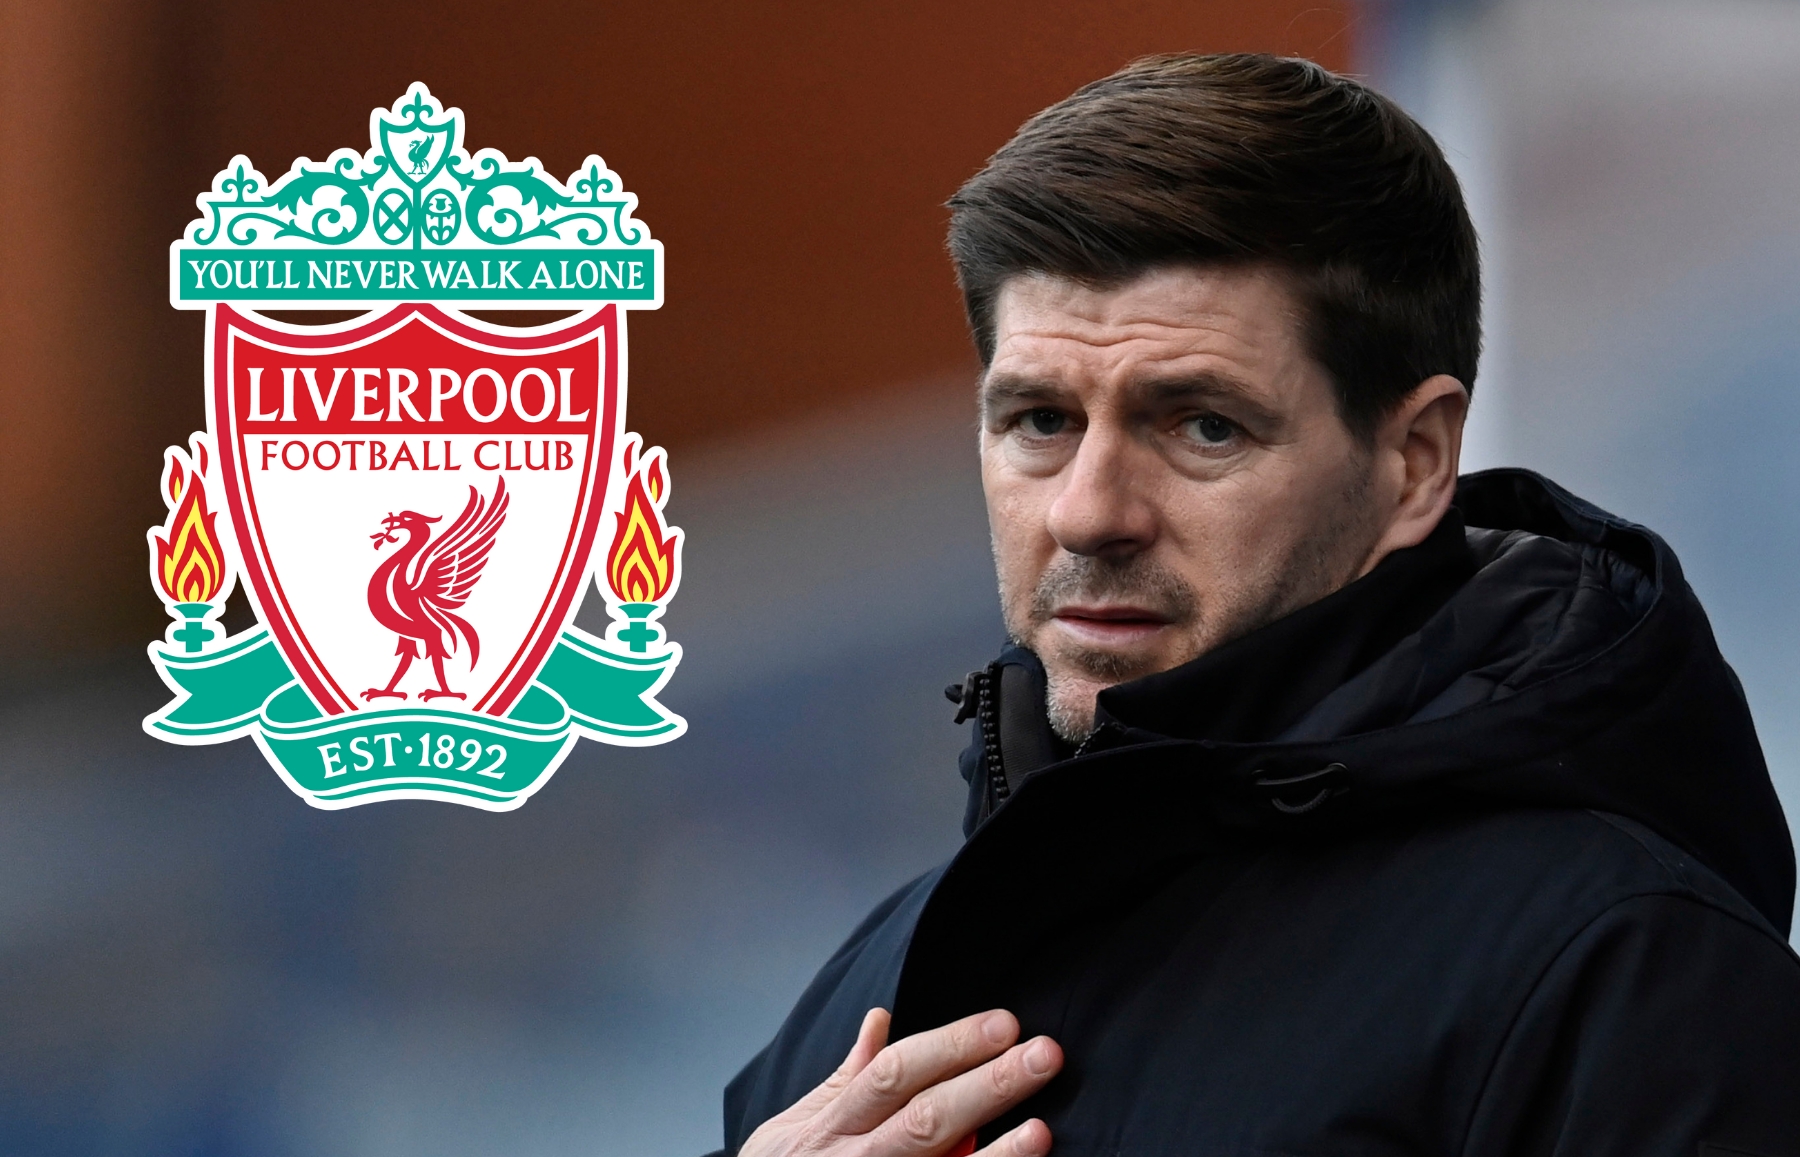 who is steven gerrard supposedly next liverpool manager bio career life and legacy